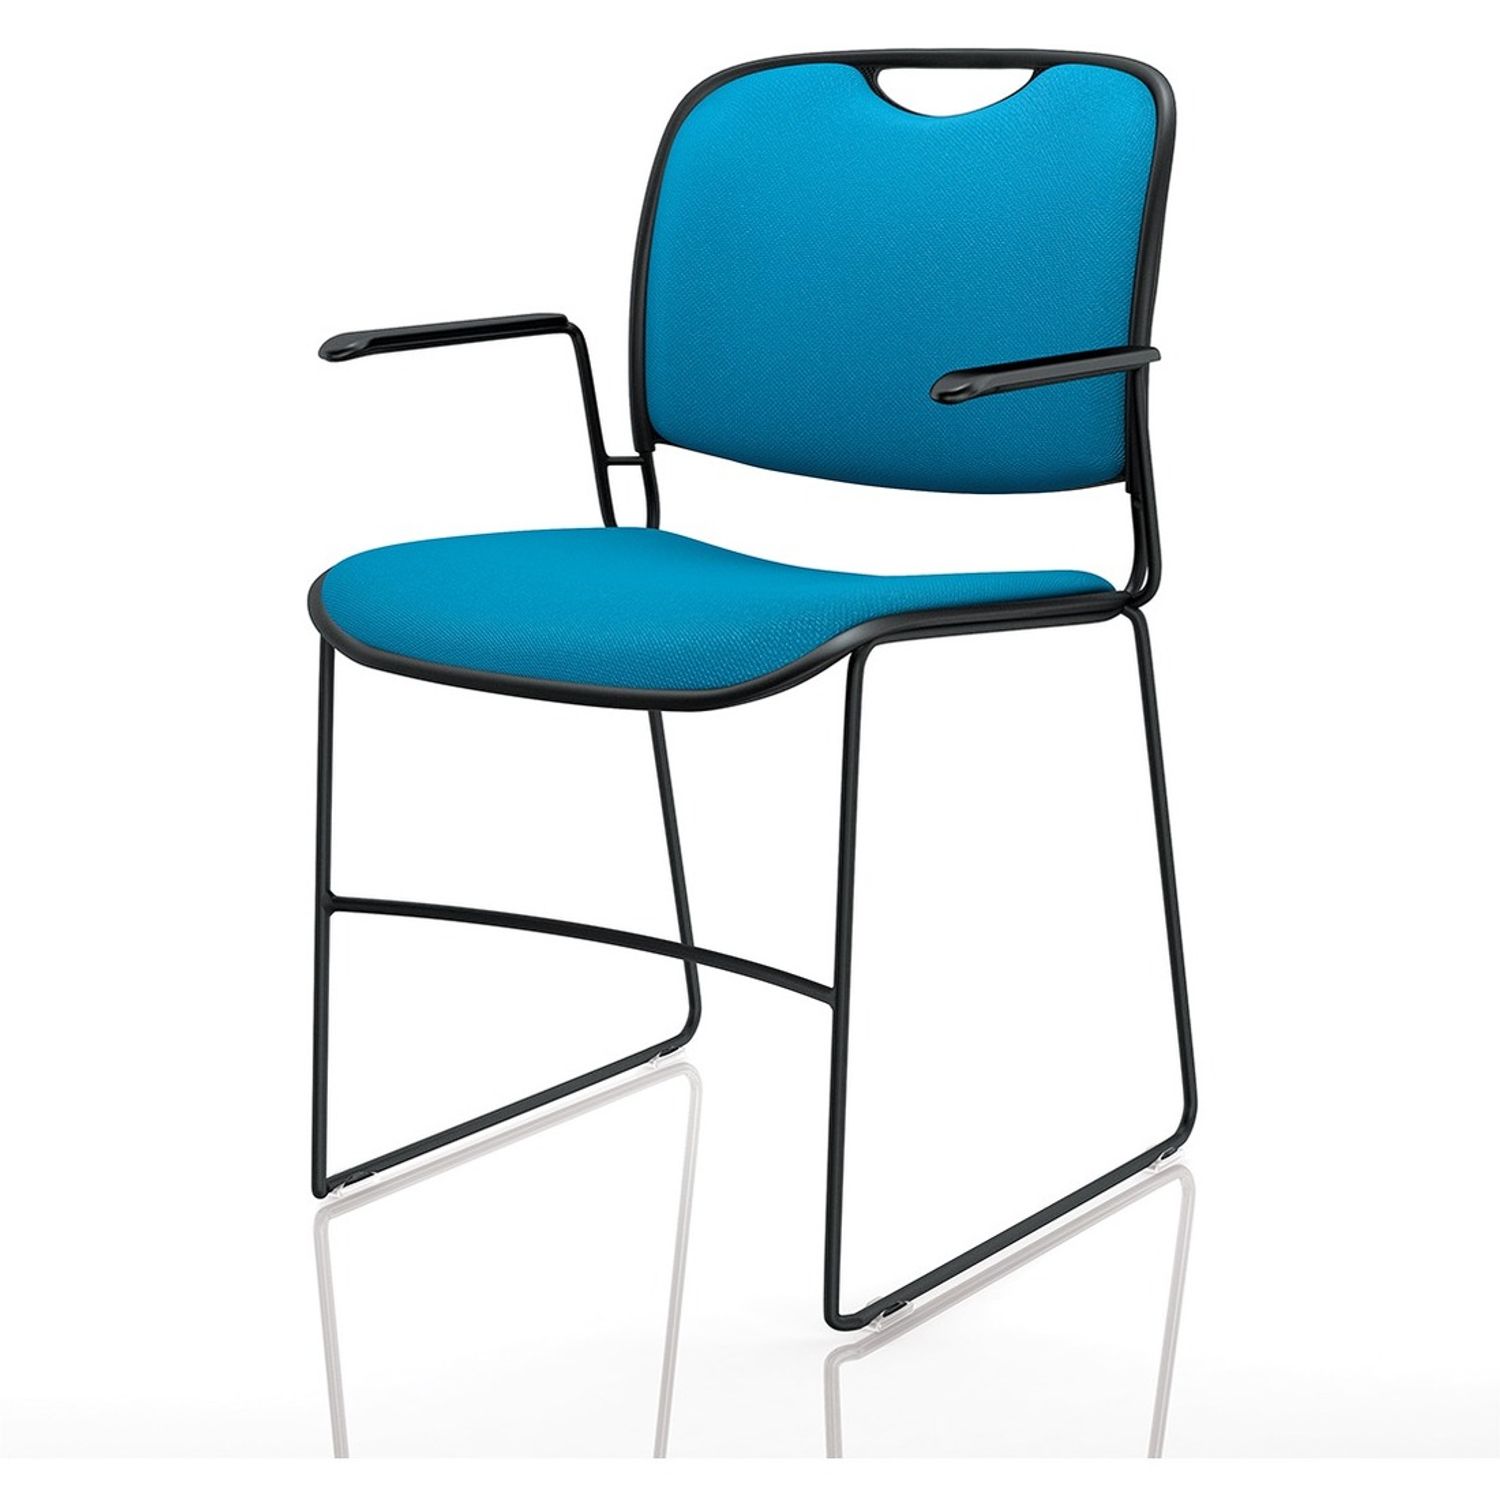 4800 Stacking Chair With Arms Black Seat, Black Back, Black Steel Frame, Cobalt, 2 Pack